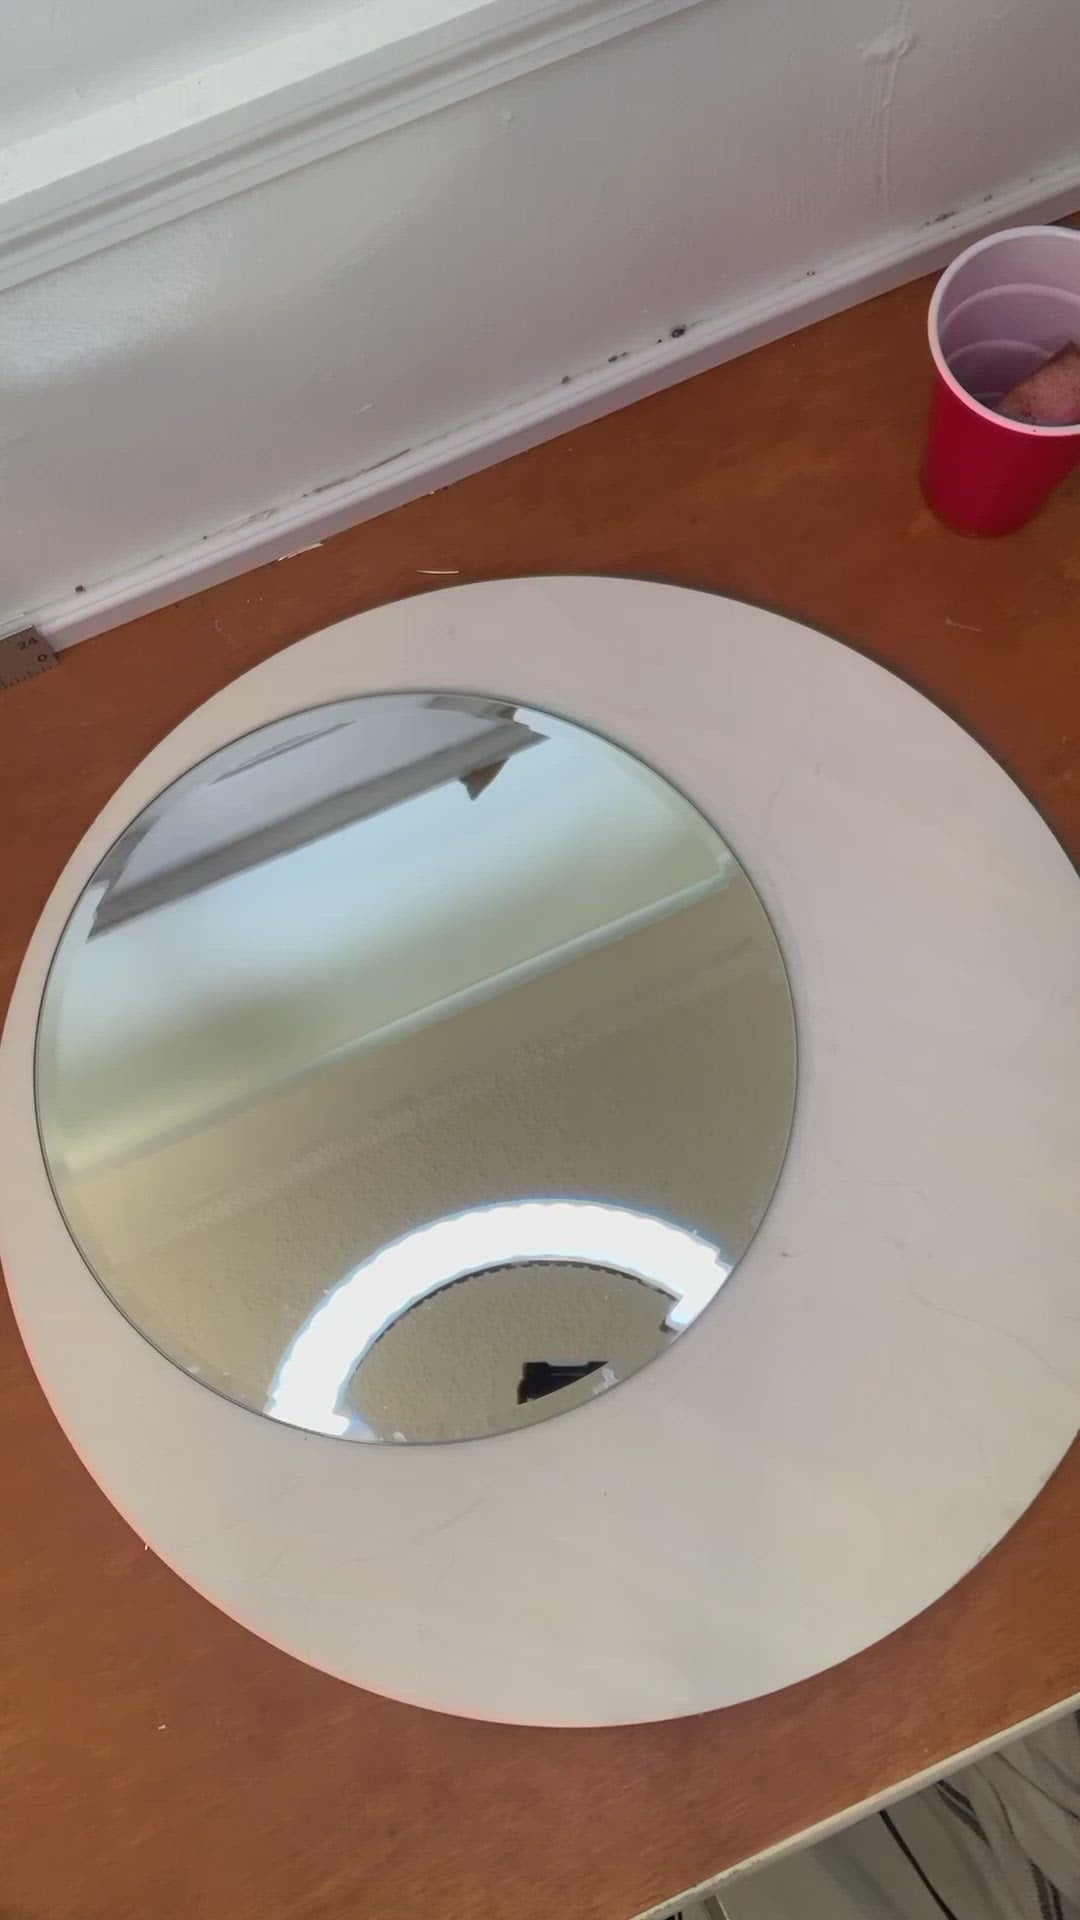 Earthy Earth Mirror (LOCAL PICK UP ONLY)